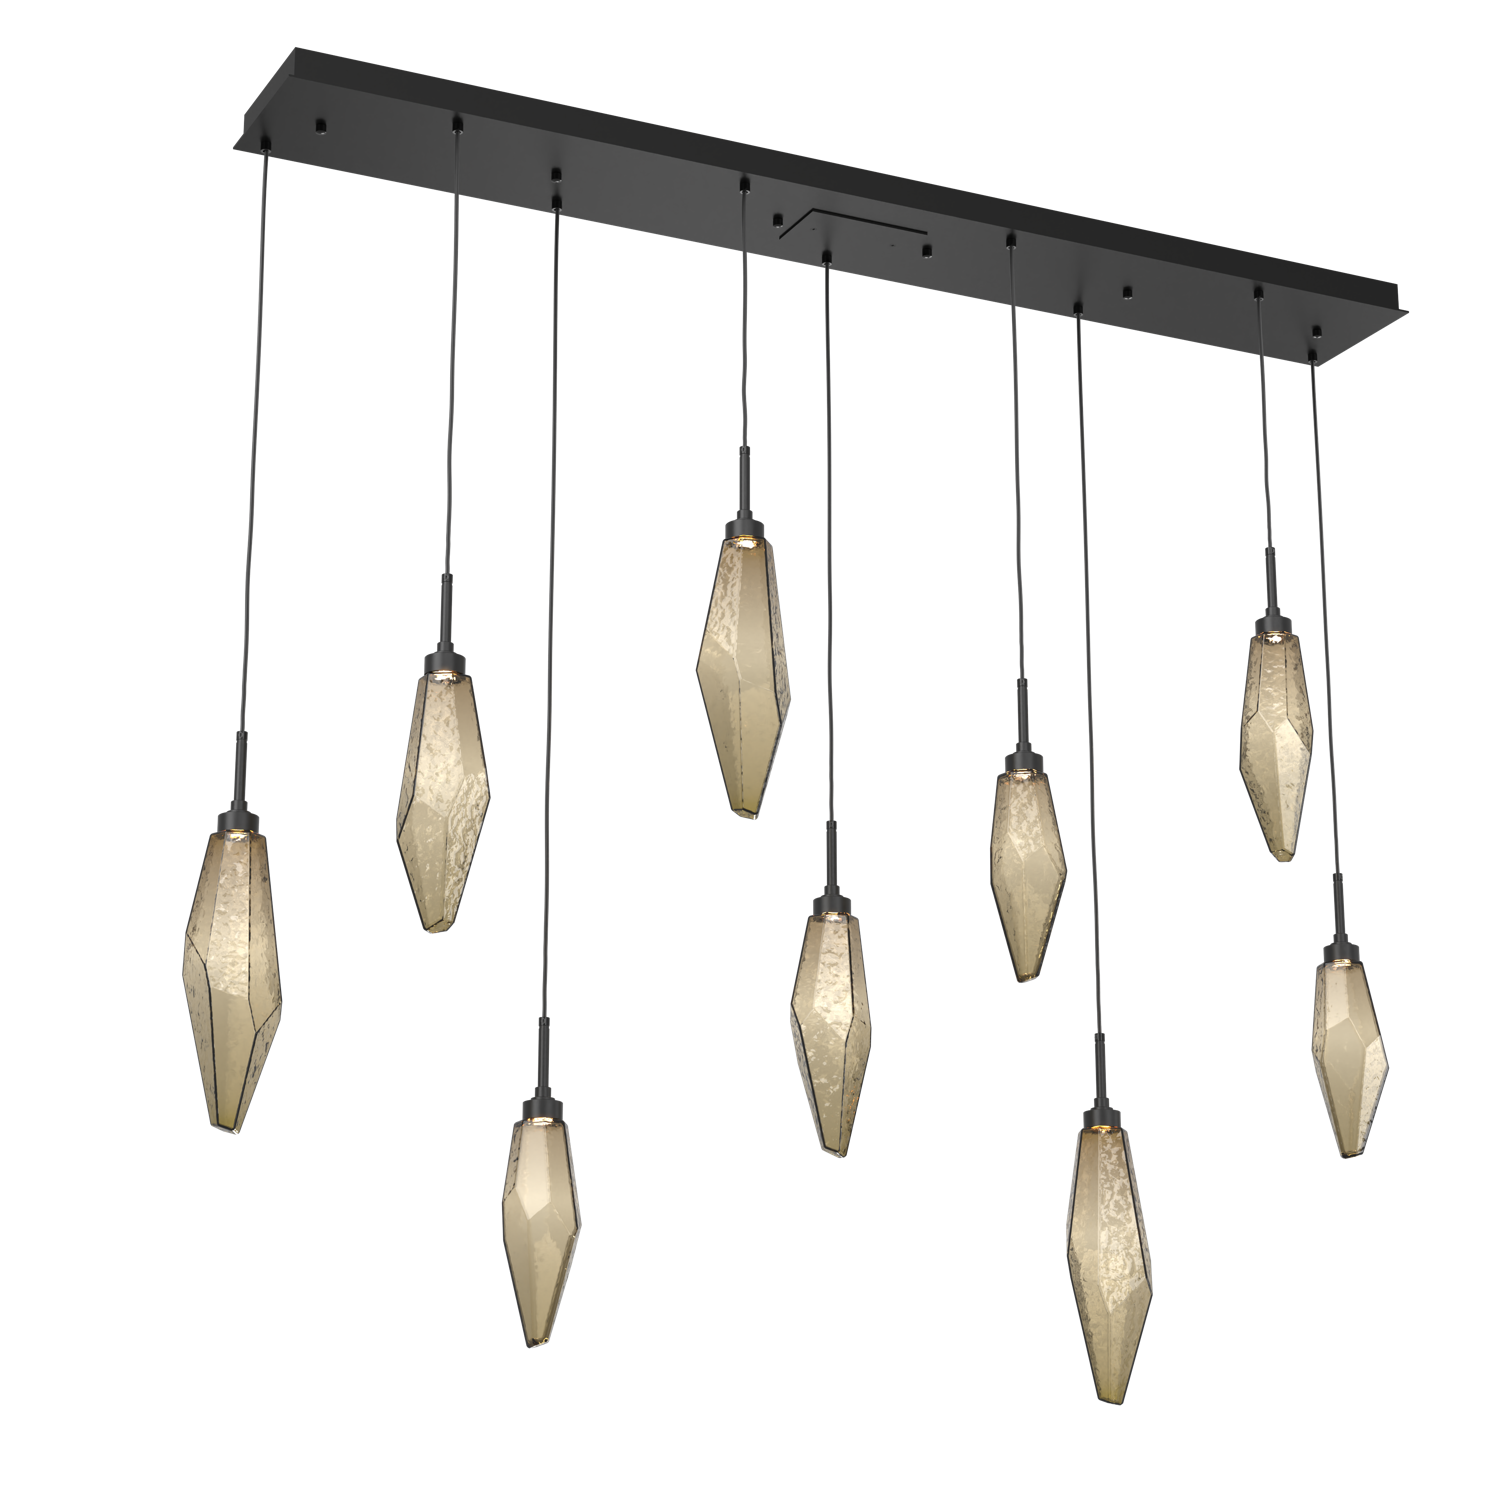 PLB0050-09-MB-CB-Hammerton-Studio-Rock-Crystal-9-light-linear-pendant-chandelier-with-matte-black-finish-and-chilled-bronze-blown-glass-shades-and-LED-lamping